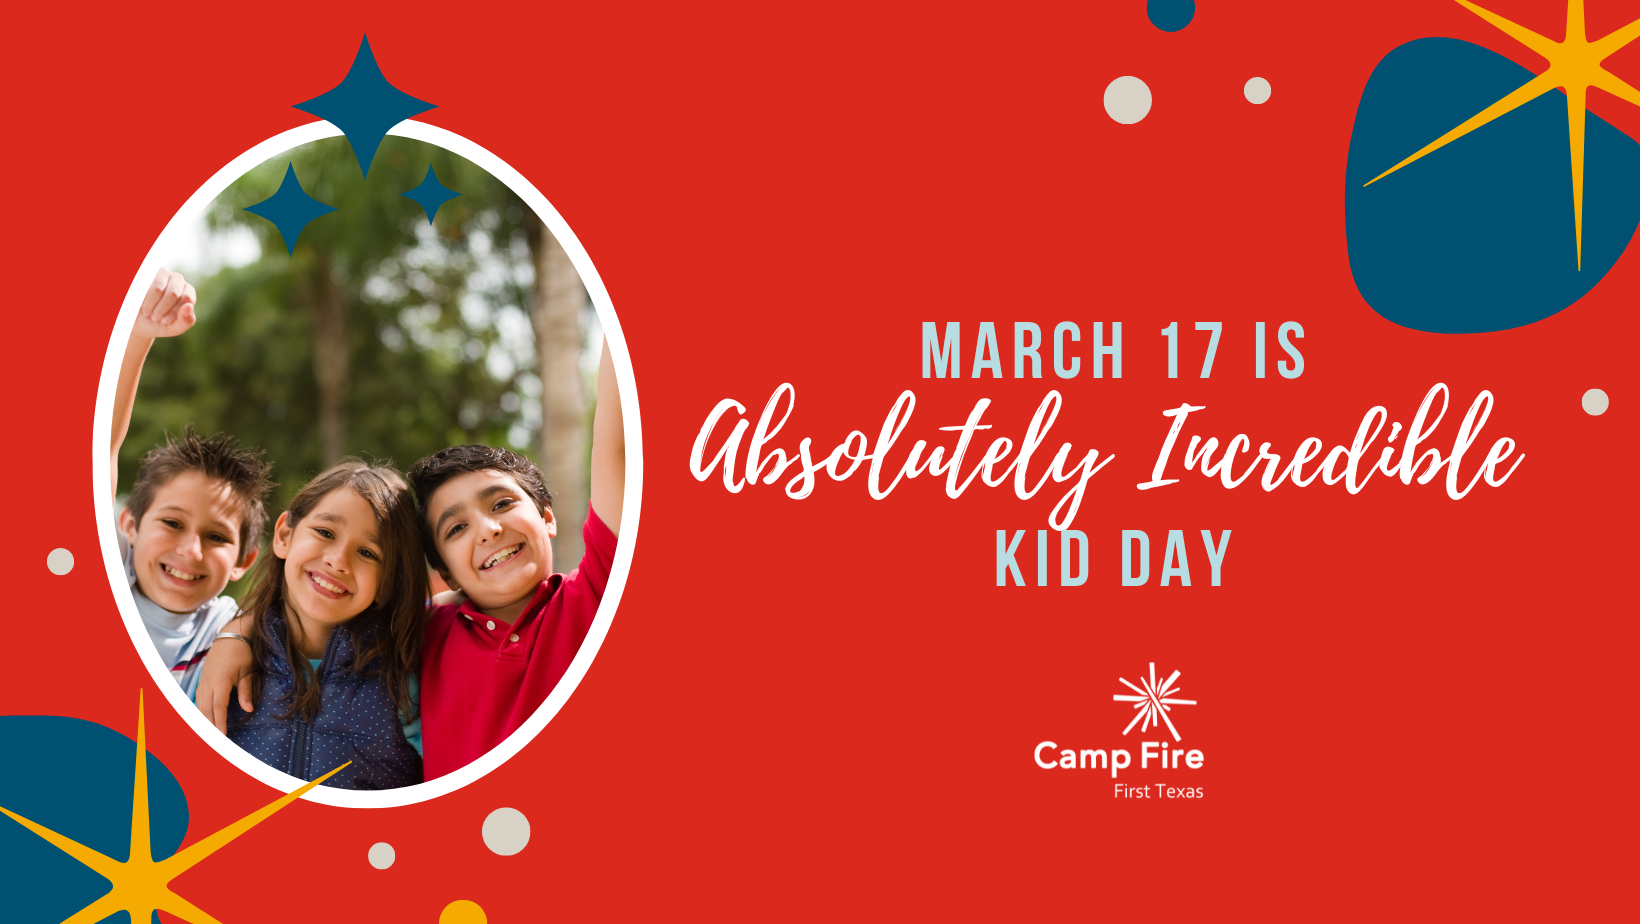 March 17 is Absolutely Incredible Kid Day, a Camp Fire First Texas blog